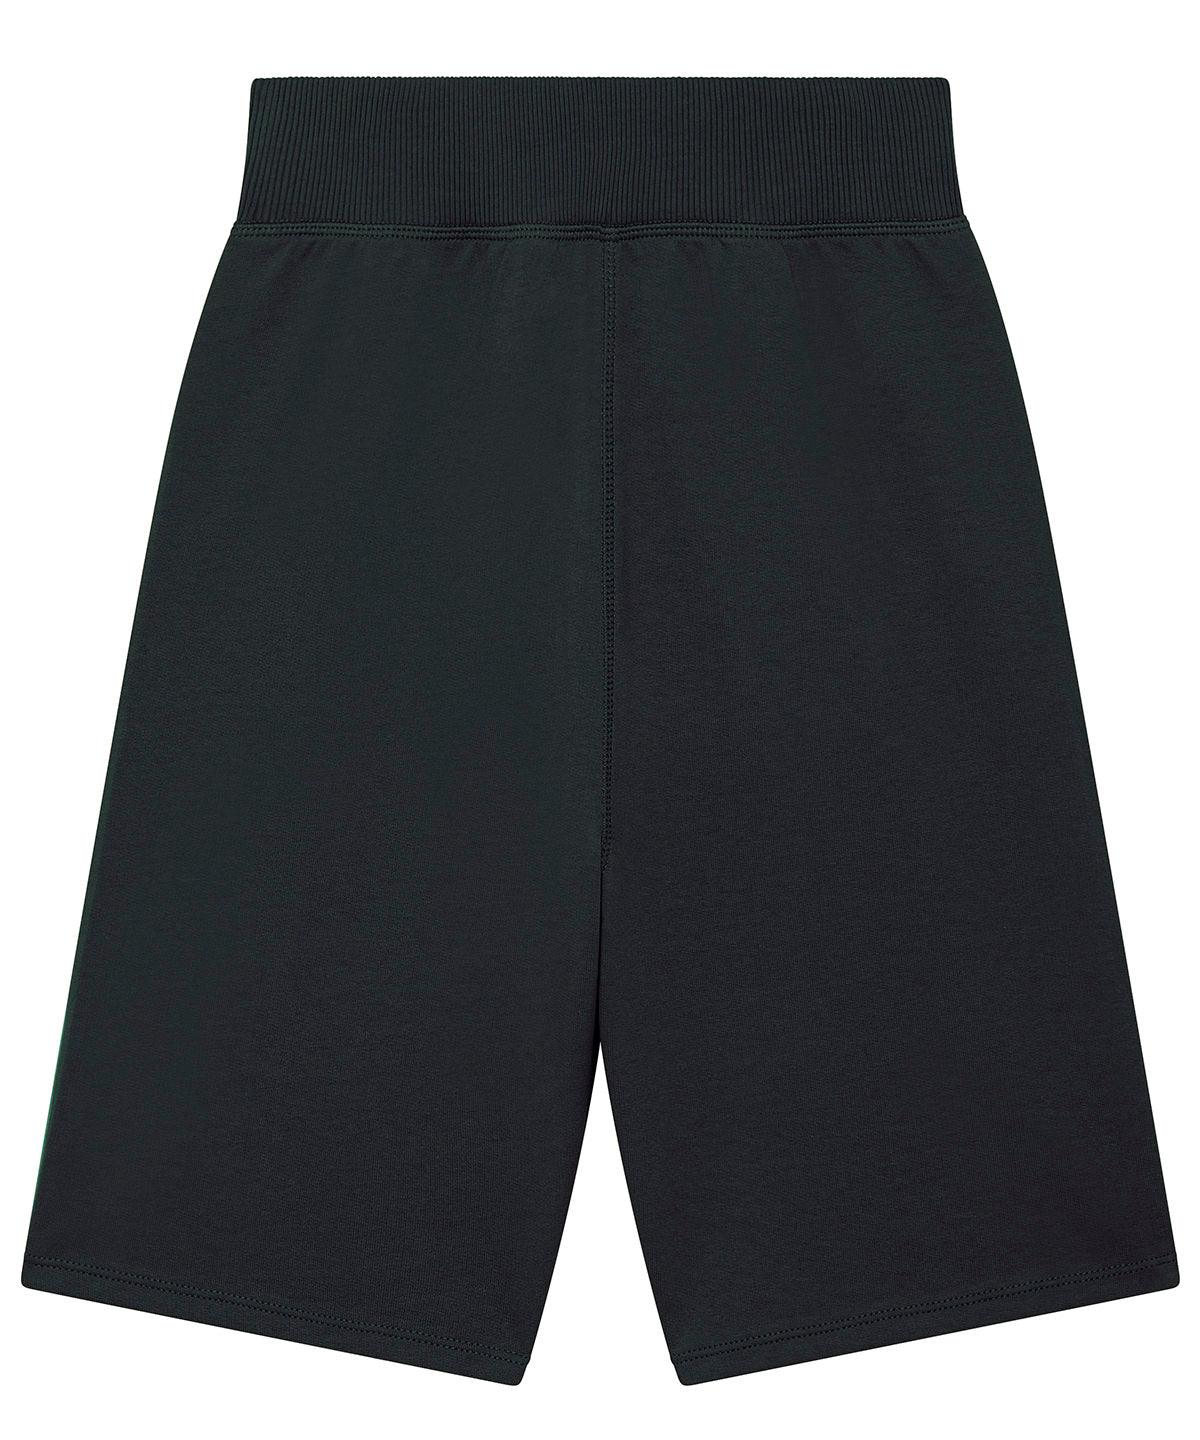 Black - Stella Ryder on-trend biker shorts (STBW586) Shorts Stanley/Stella Athleisurewear, Exclusives, Festival, Home Comforts, New Styles For 2022, On-Trend Activewear, Organic & Conscious, Raladeal - Stanley Stella, Stanley/ Stella, Trousers & Shorts Schoolwear Centres